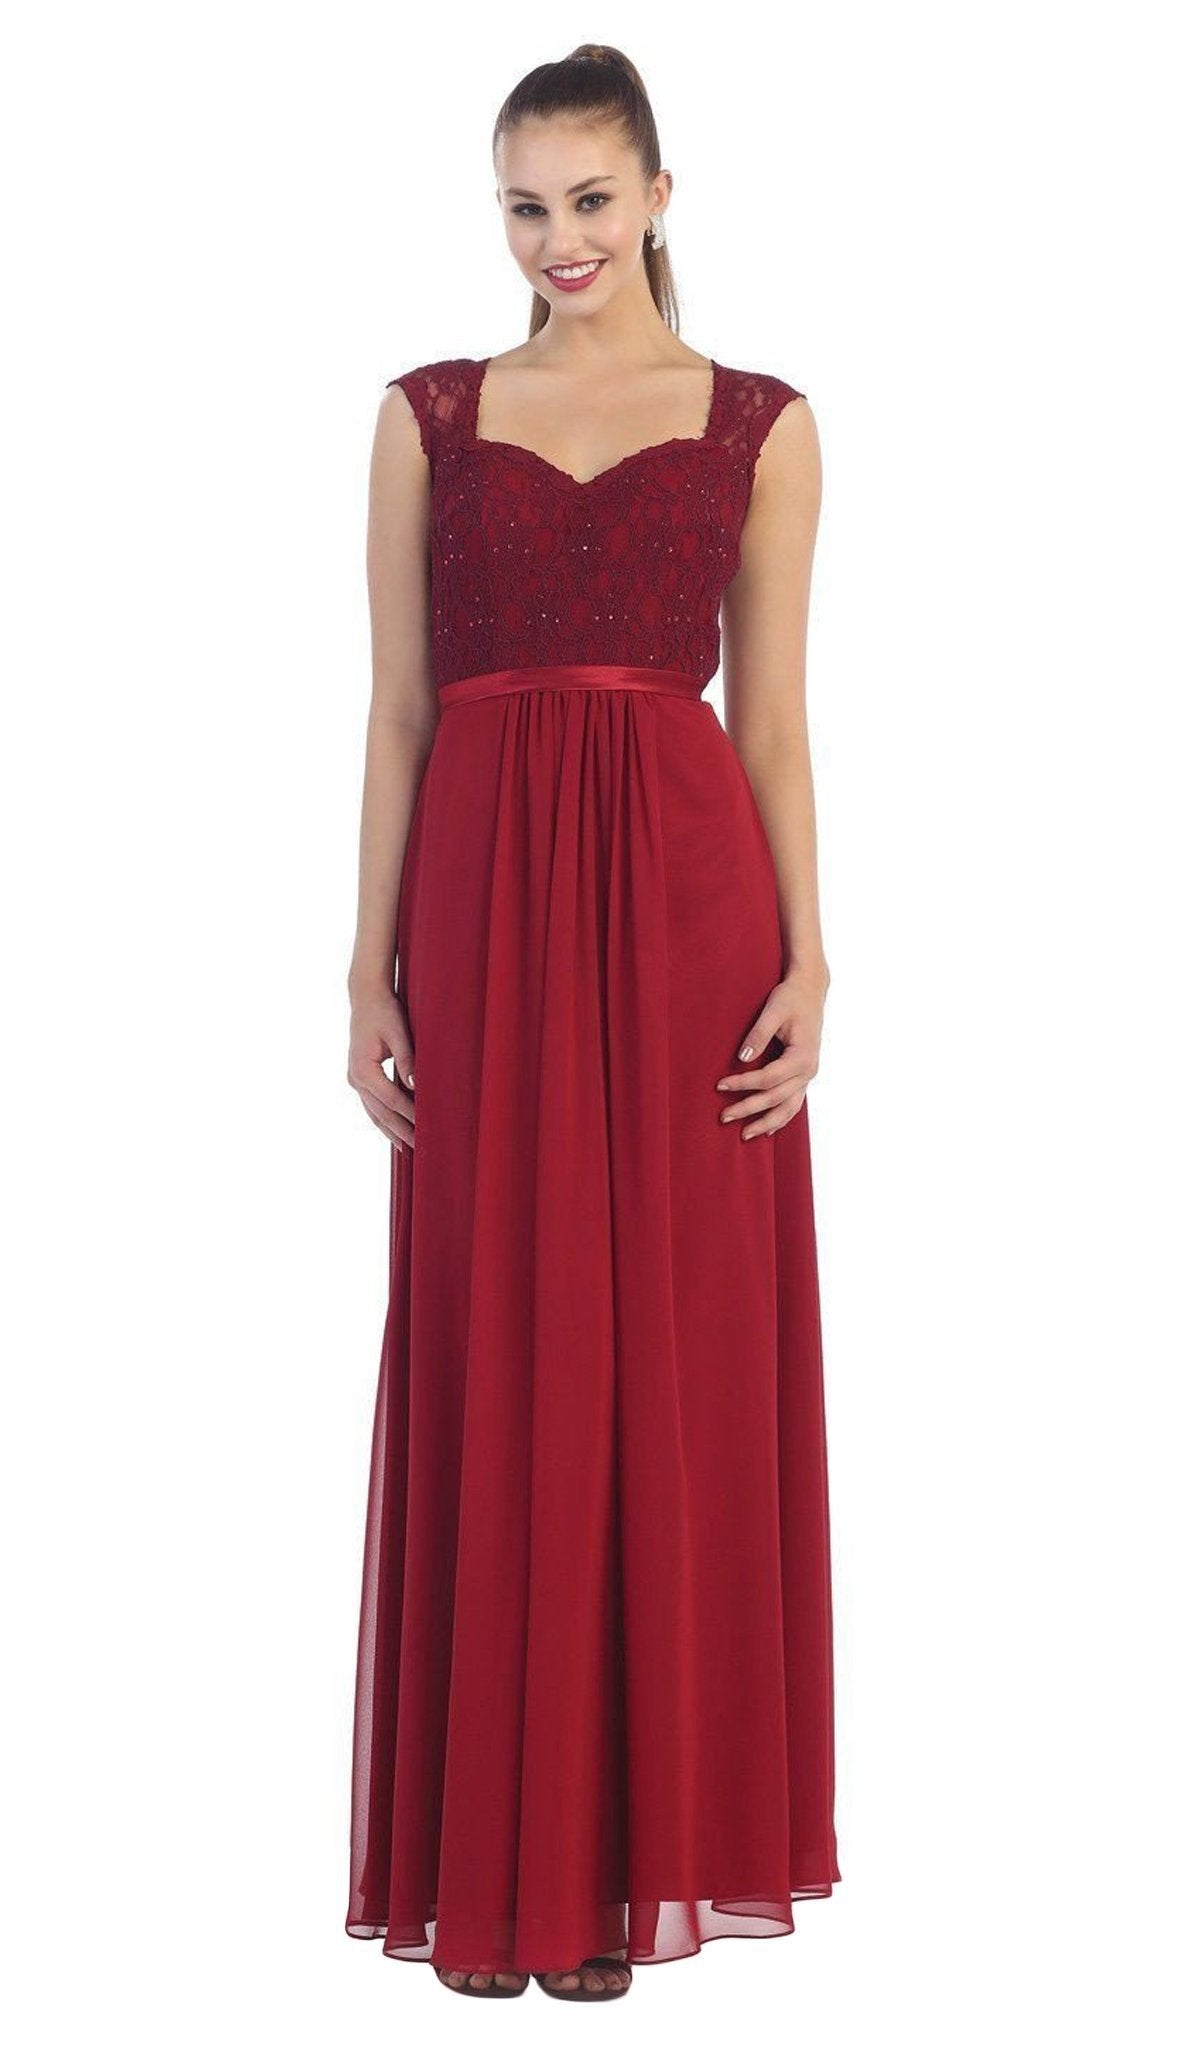 May Queen - Stunning Embellished Sweetheart Neck Chiffon A-Line Evening Dress Special Occasion Dress 4 / Burgundy